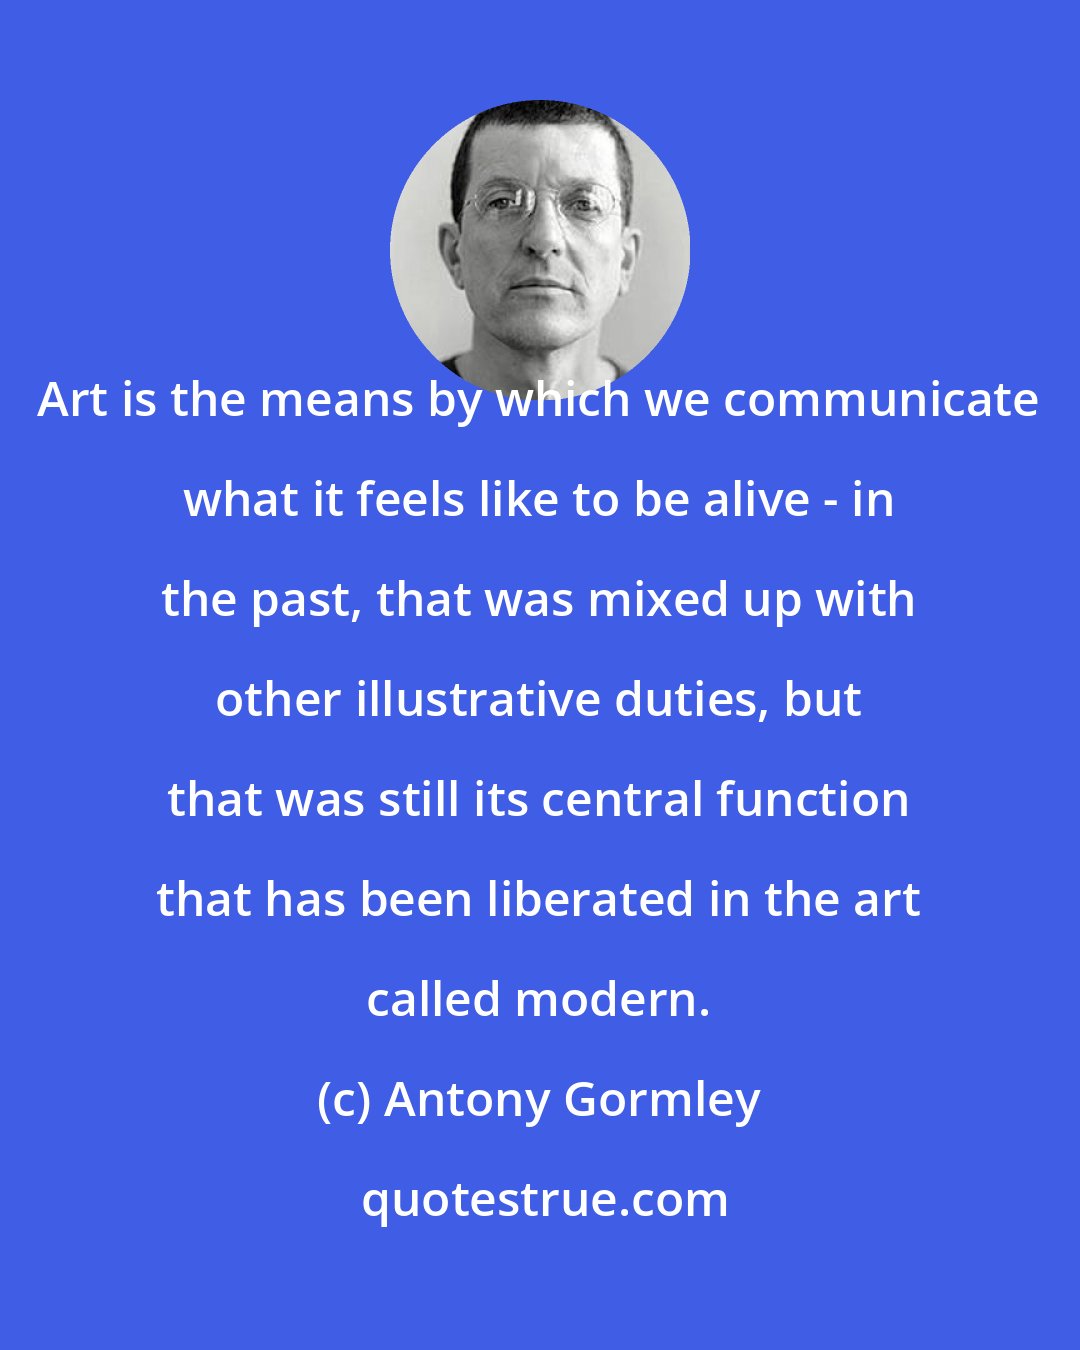 Antony Gormley: Art is the means by which we communicate what it feels like to be alive - in the past, that was mixed up with other illustrative duties, but that was still its central function that has been liberated in the art called modern.